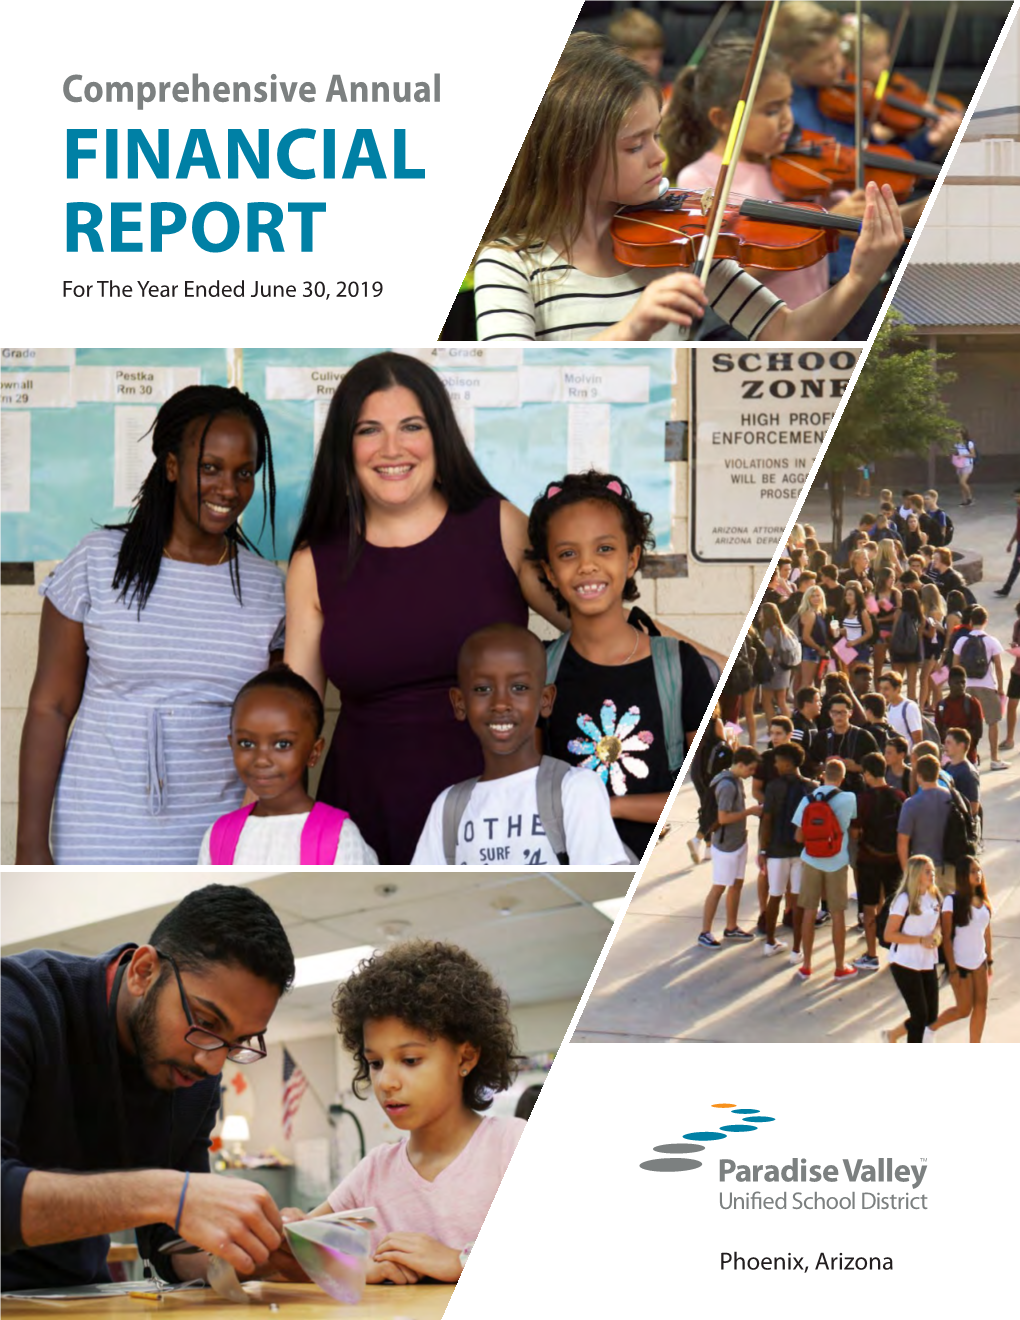 Comprehensive Annual FINANCIAL REPORT for the Year Ended June 30, 2019